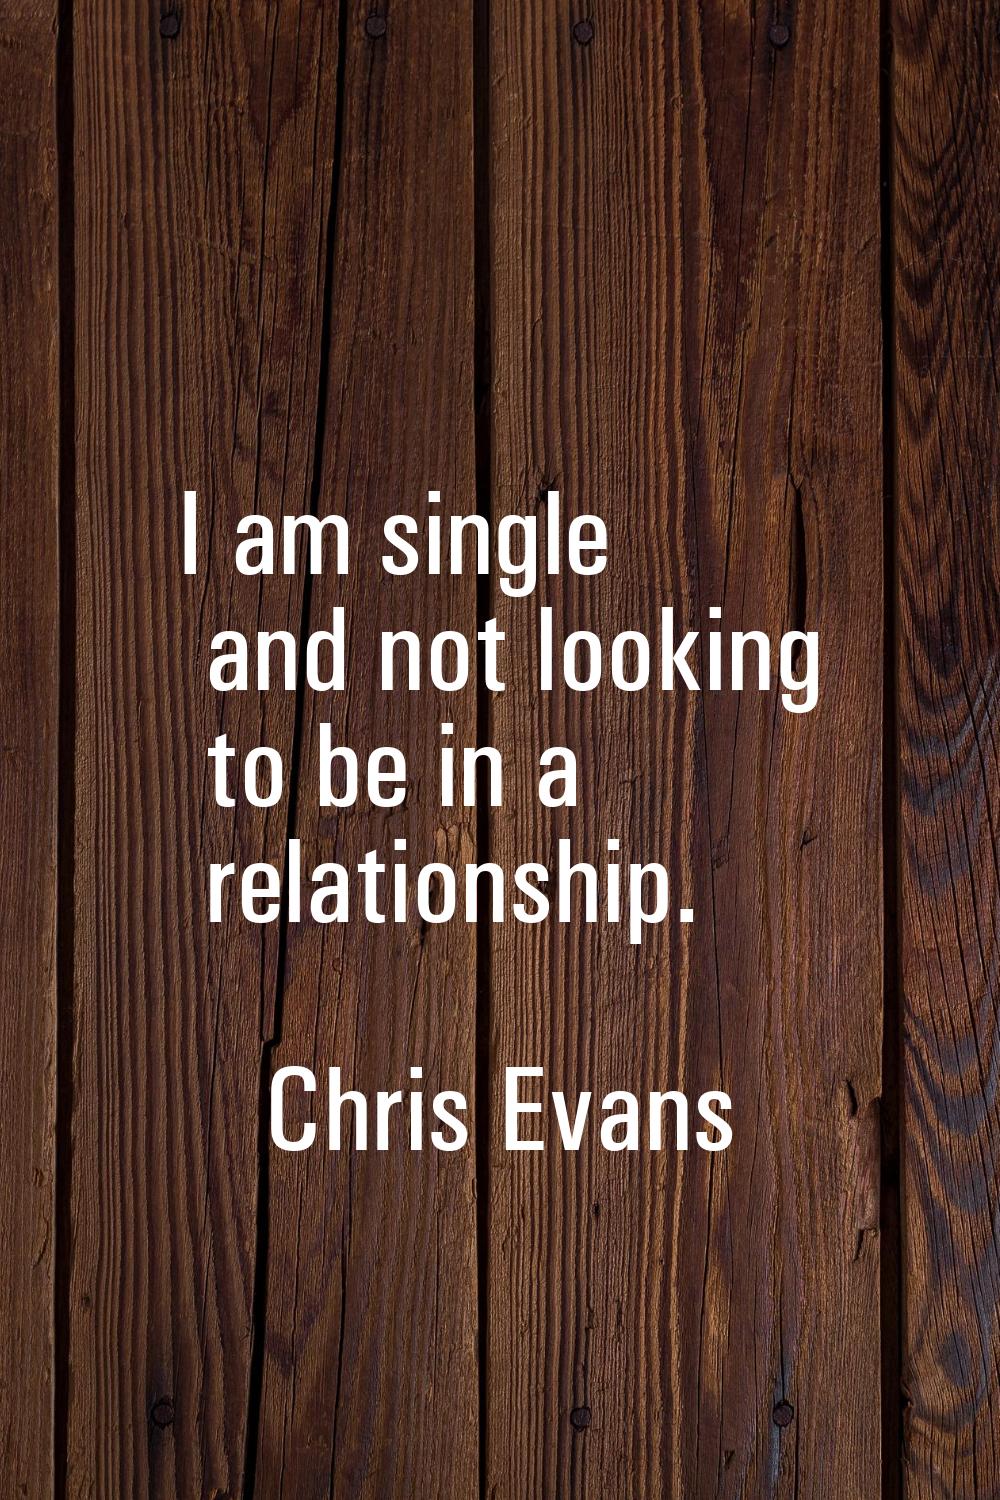 I am single and not looking to be in a relationship.